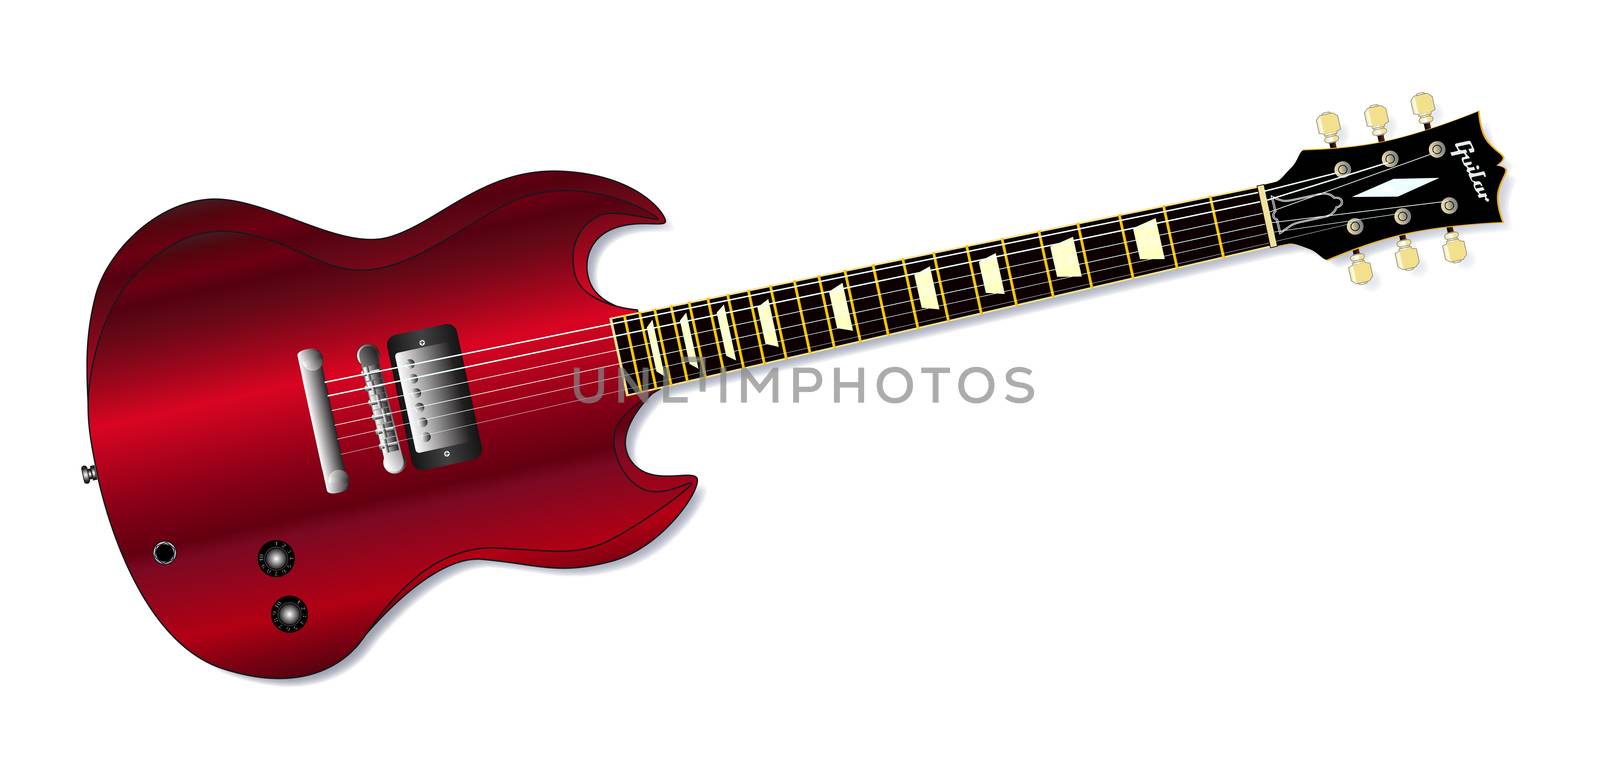 A solid body electric guitar set in a white background.